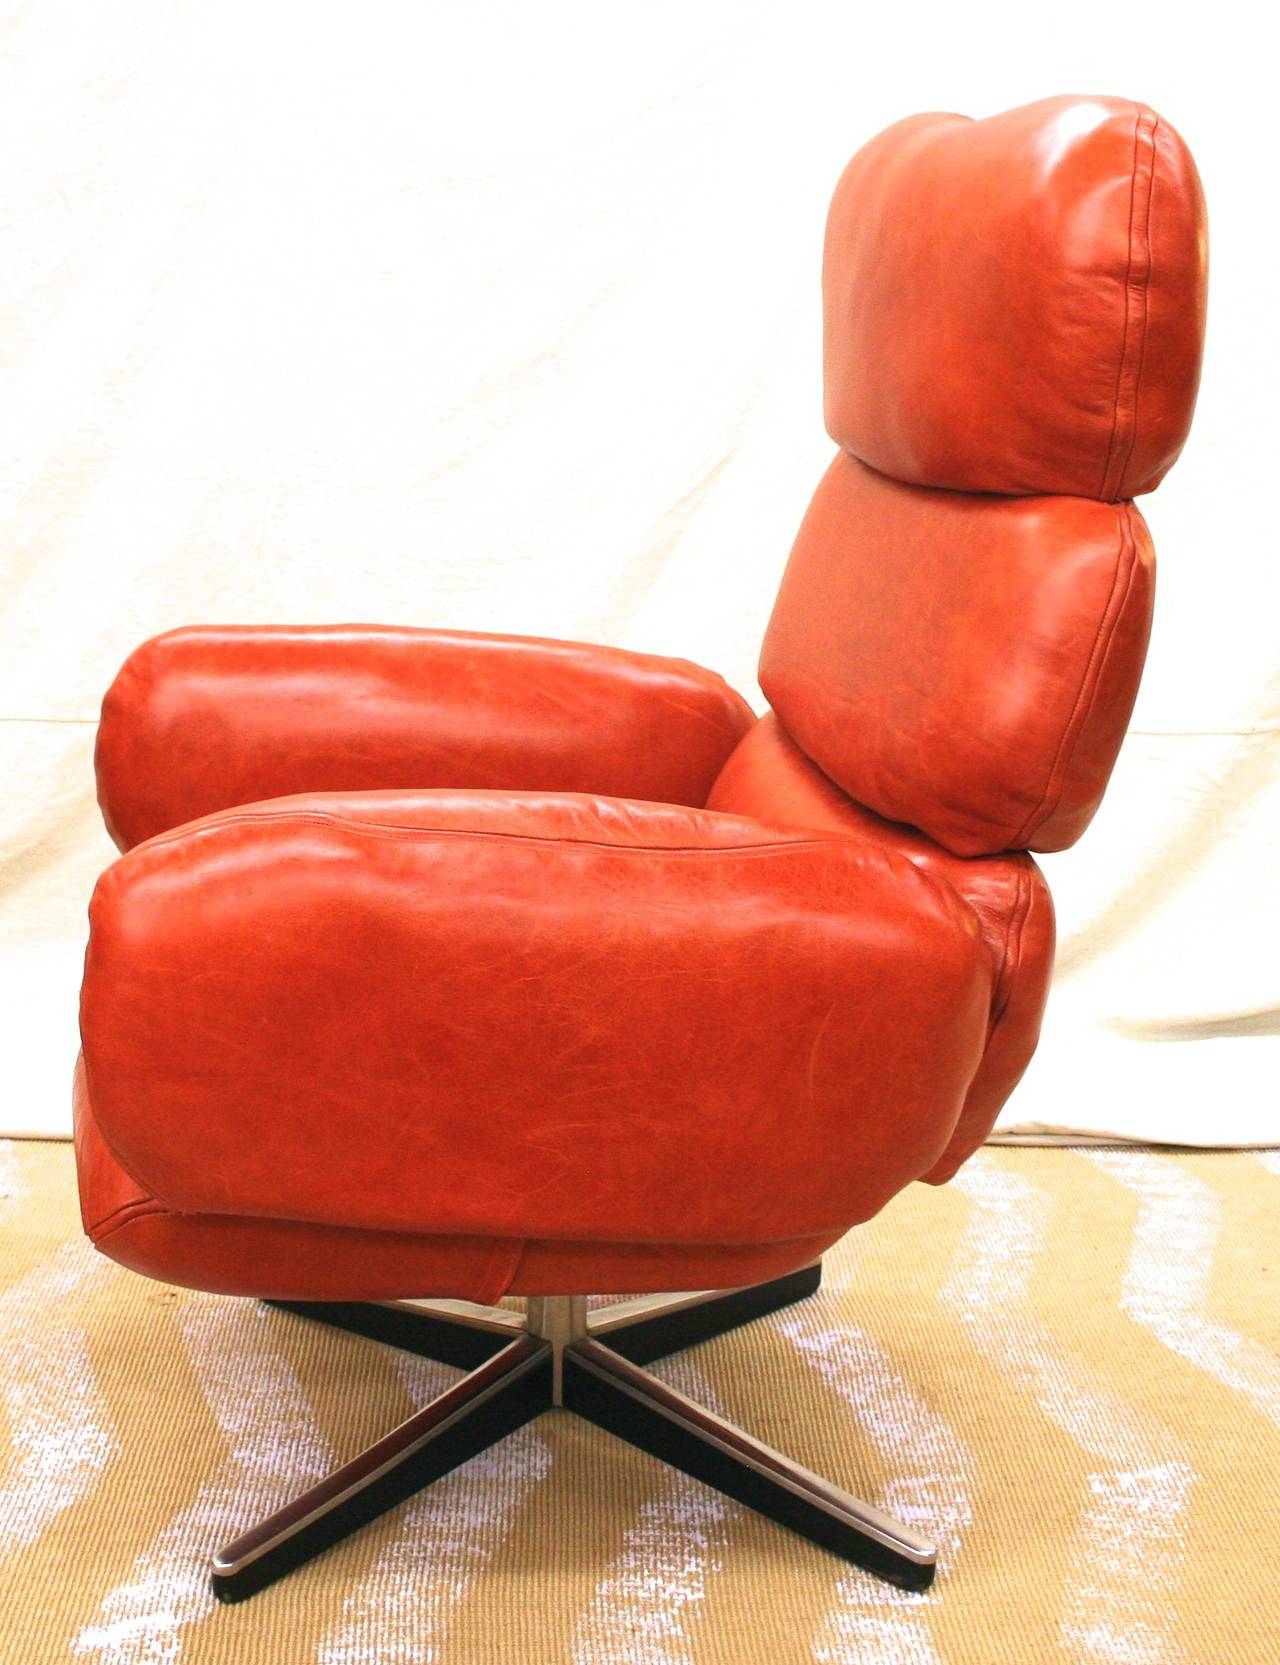 Comfortable, cushioned executive style desk chair on swivel base, designed in the style of Otto Zapf for Knoll. Swivels and reclines smoothly. Newly upholstered with leather, whose beautiful natural grain shows through the red-orange finish. Otto